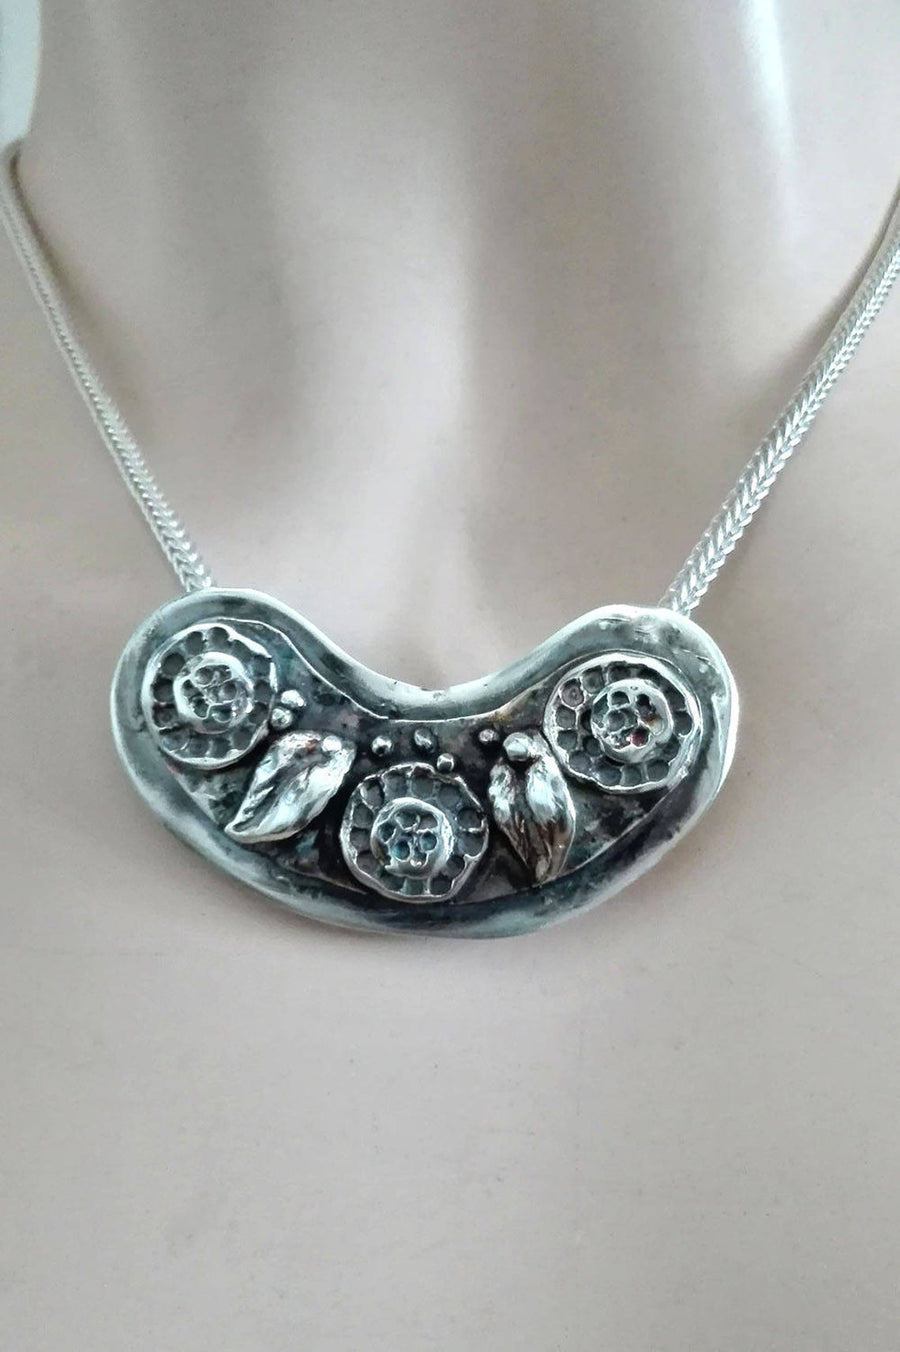 Nature Inspired Necklace, Nature Pendant, Garden Necklace, Sculpted Pendant, Sterling Silver Jewelry, Chunky Pendant, Statement